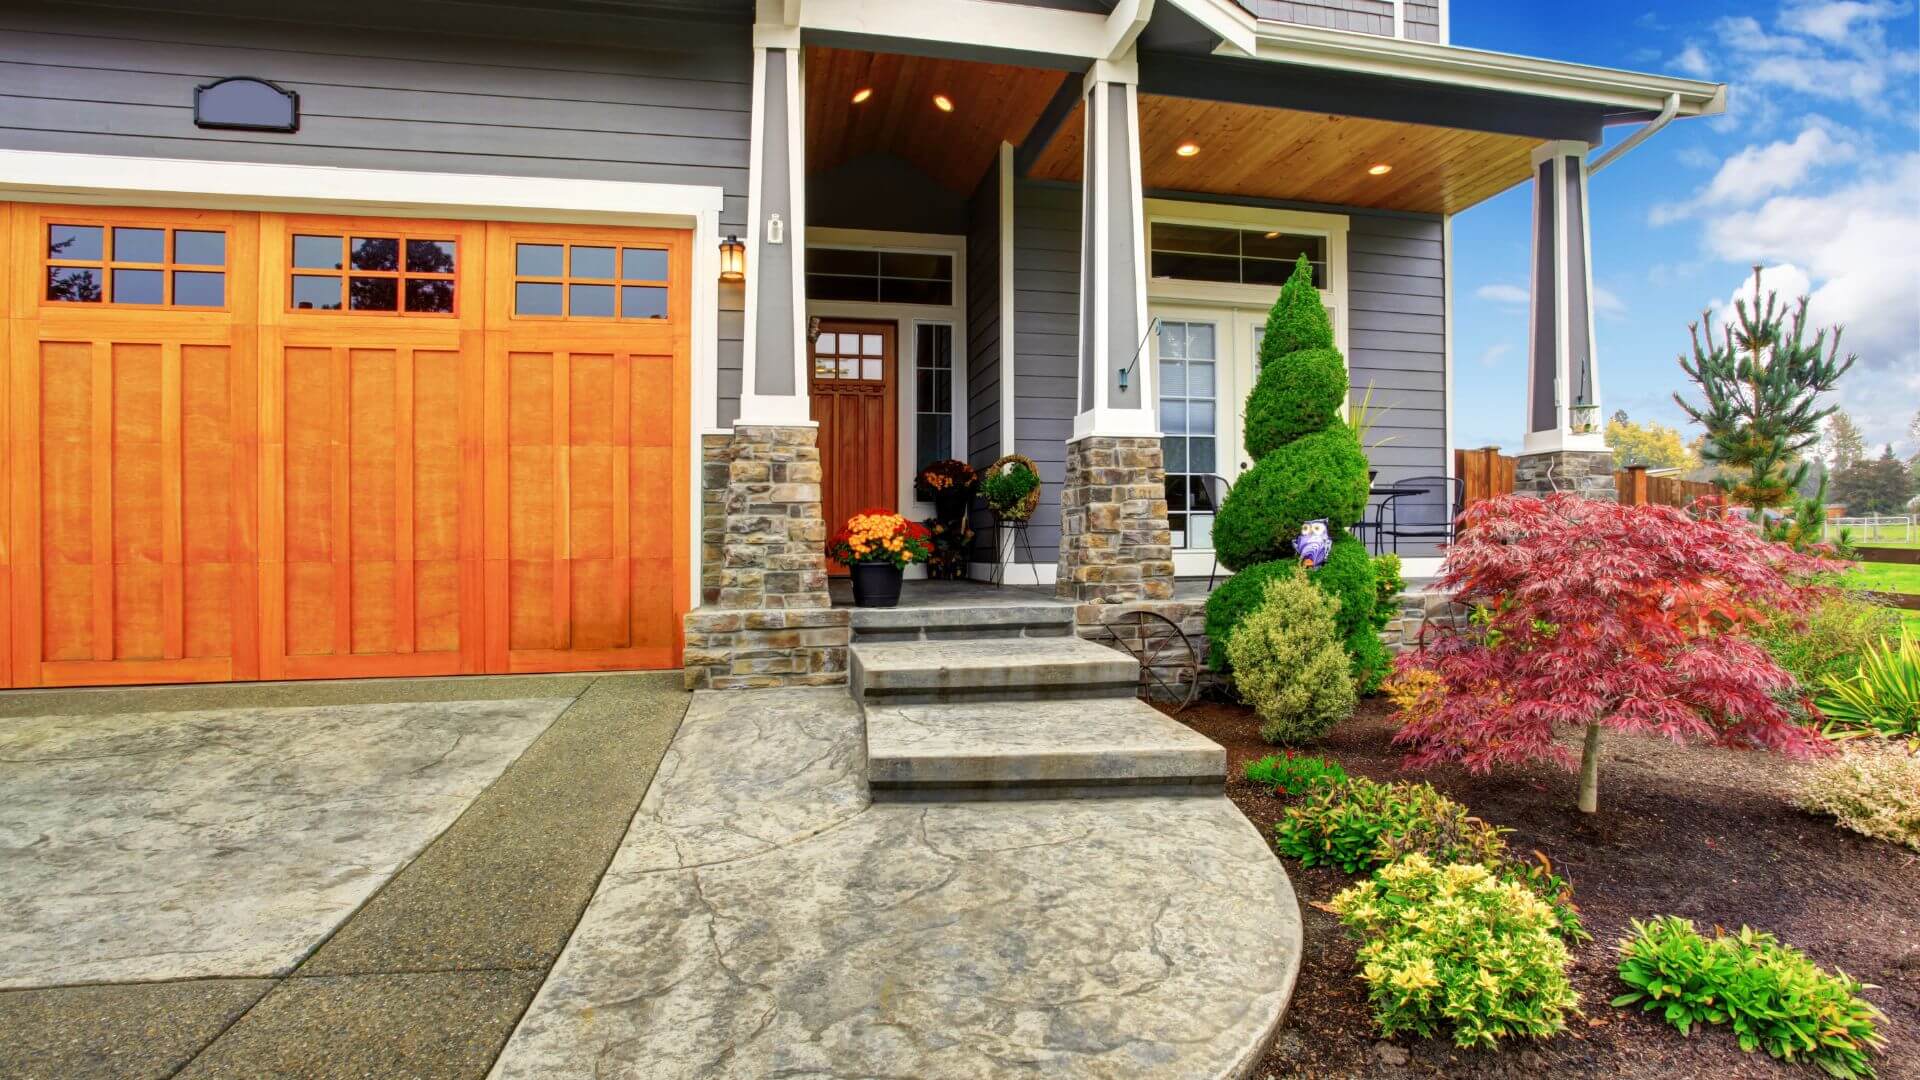 Add Curb Appeal to Your Front Yard With These Simple Tips